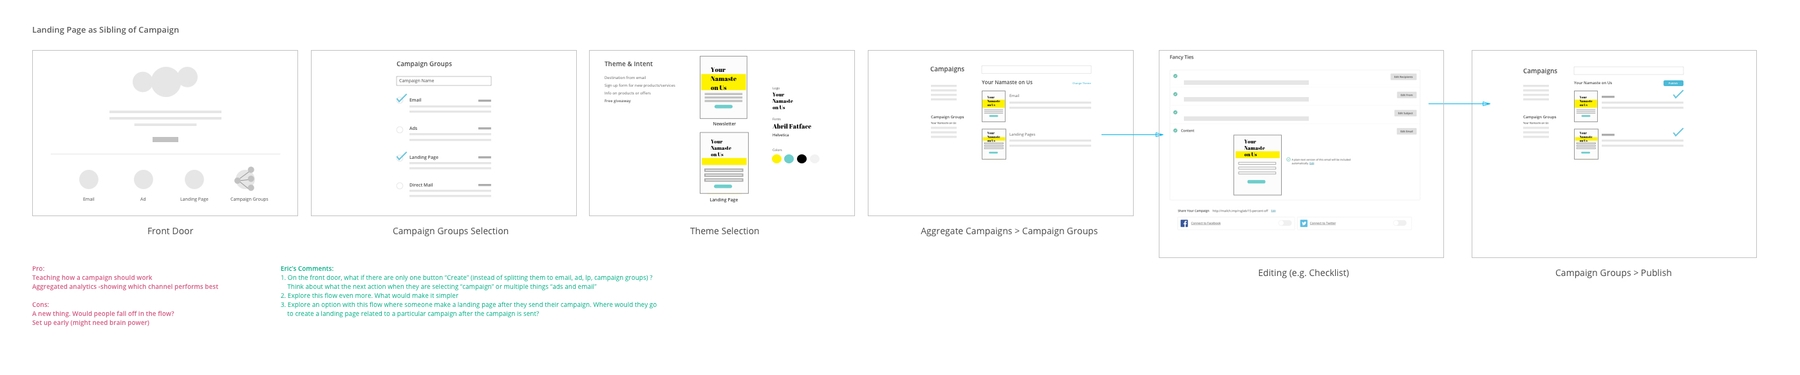 Early concept of campaigns and landing pages relationship